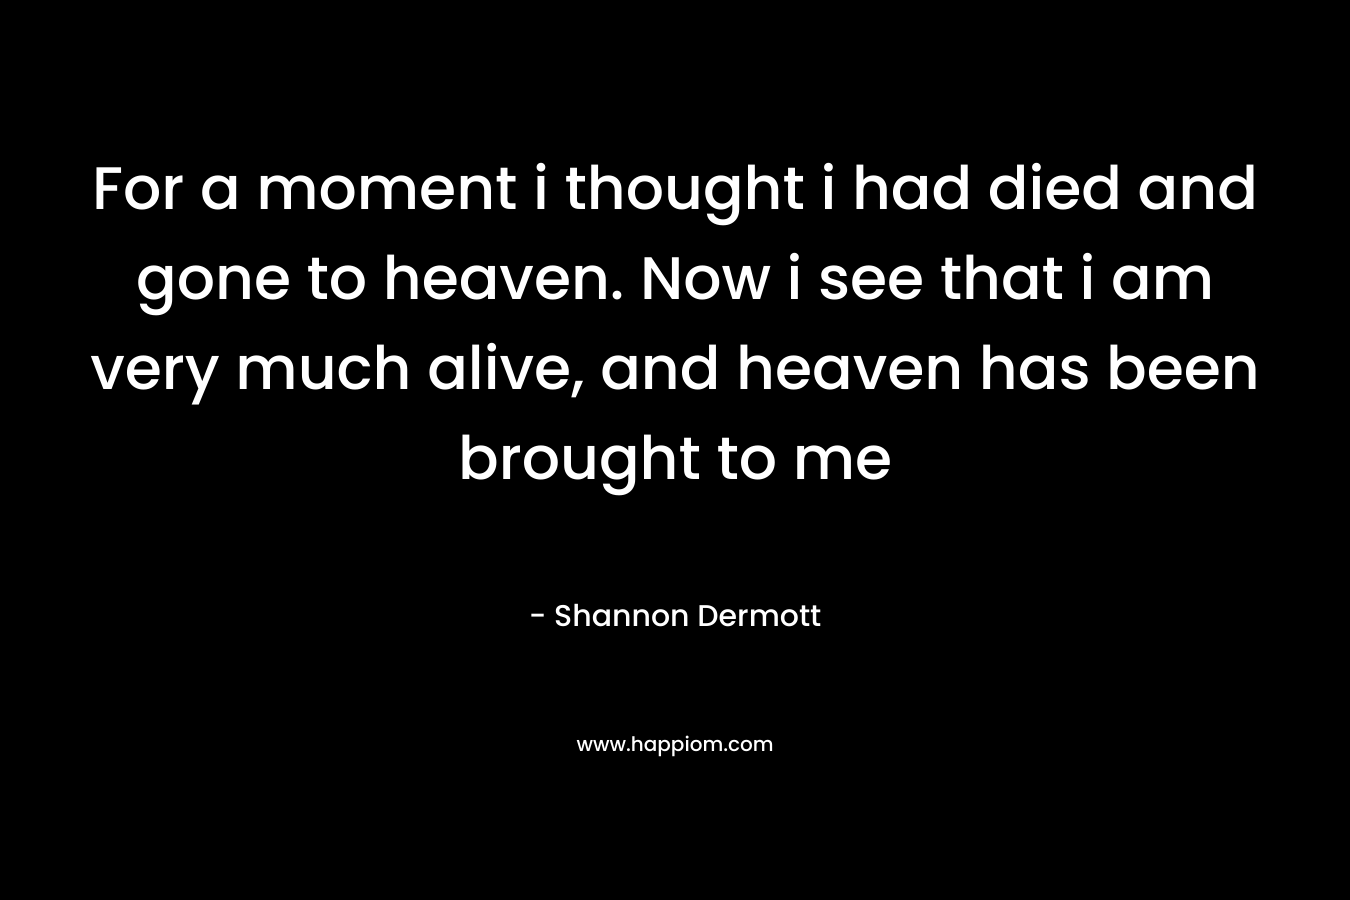 For a moment i thought i had died and gone to heaven. Now i see that i am very much alive, and heaven has been brought to me – Shannon Dermott